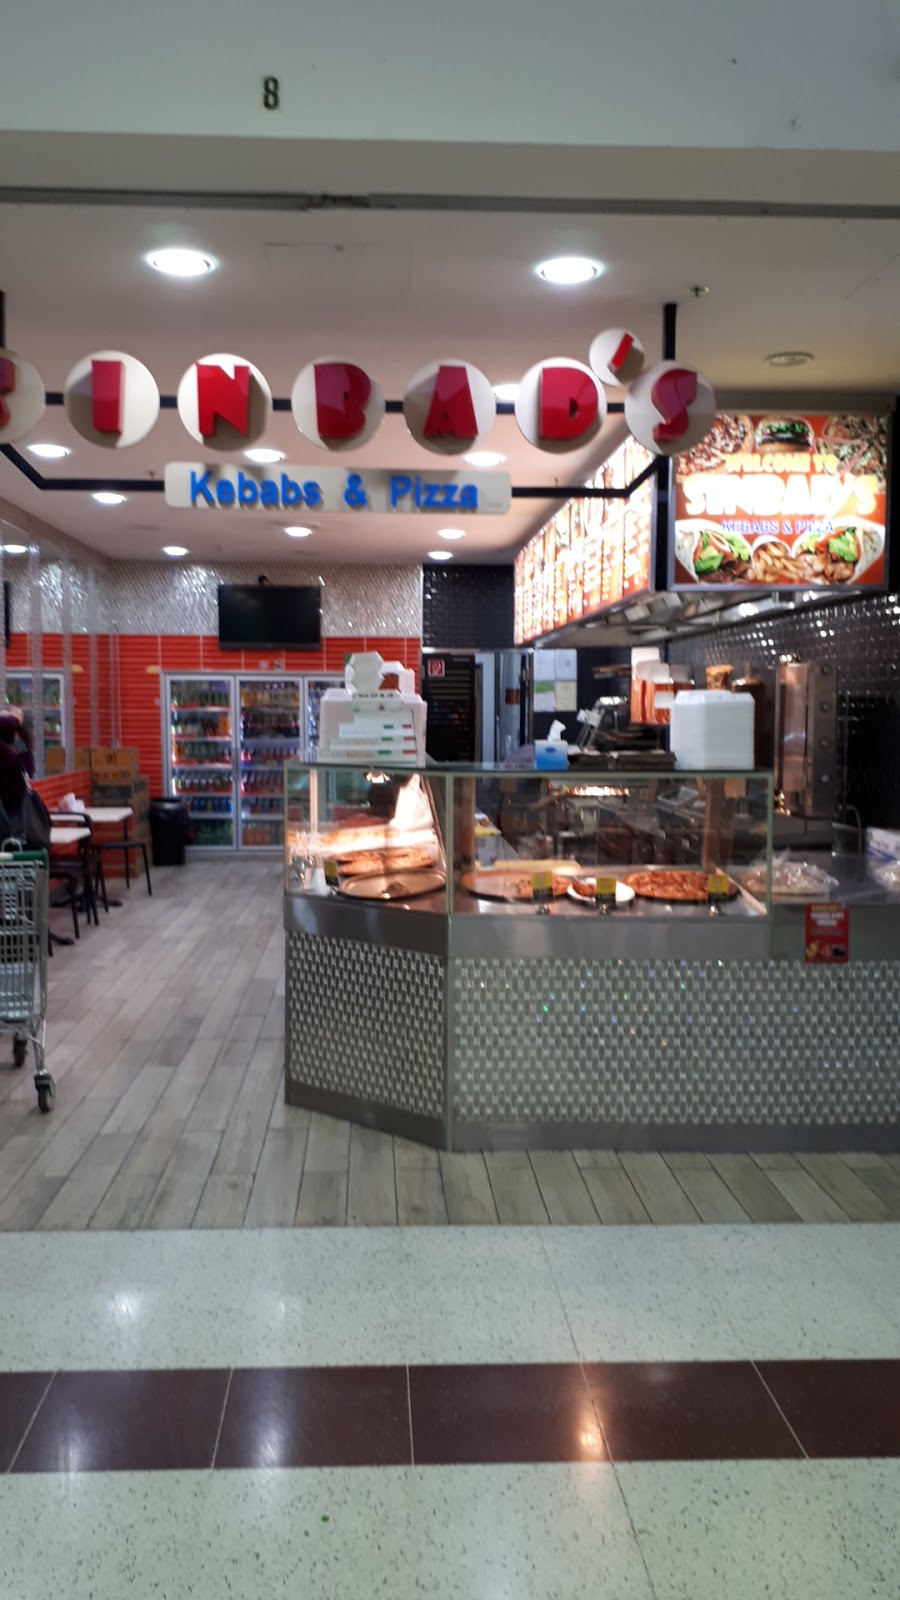 Sinbads Kebab Pizza and Gozleme | restaurant | 8/76 Falmouth Rd, Quakers Hill NSW 2763, Australia | 0298378899 OR +61 2 9837 8899